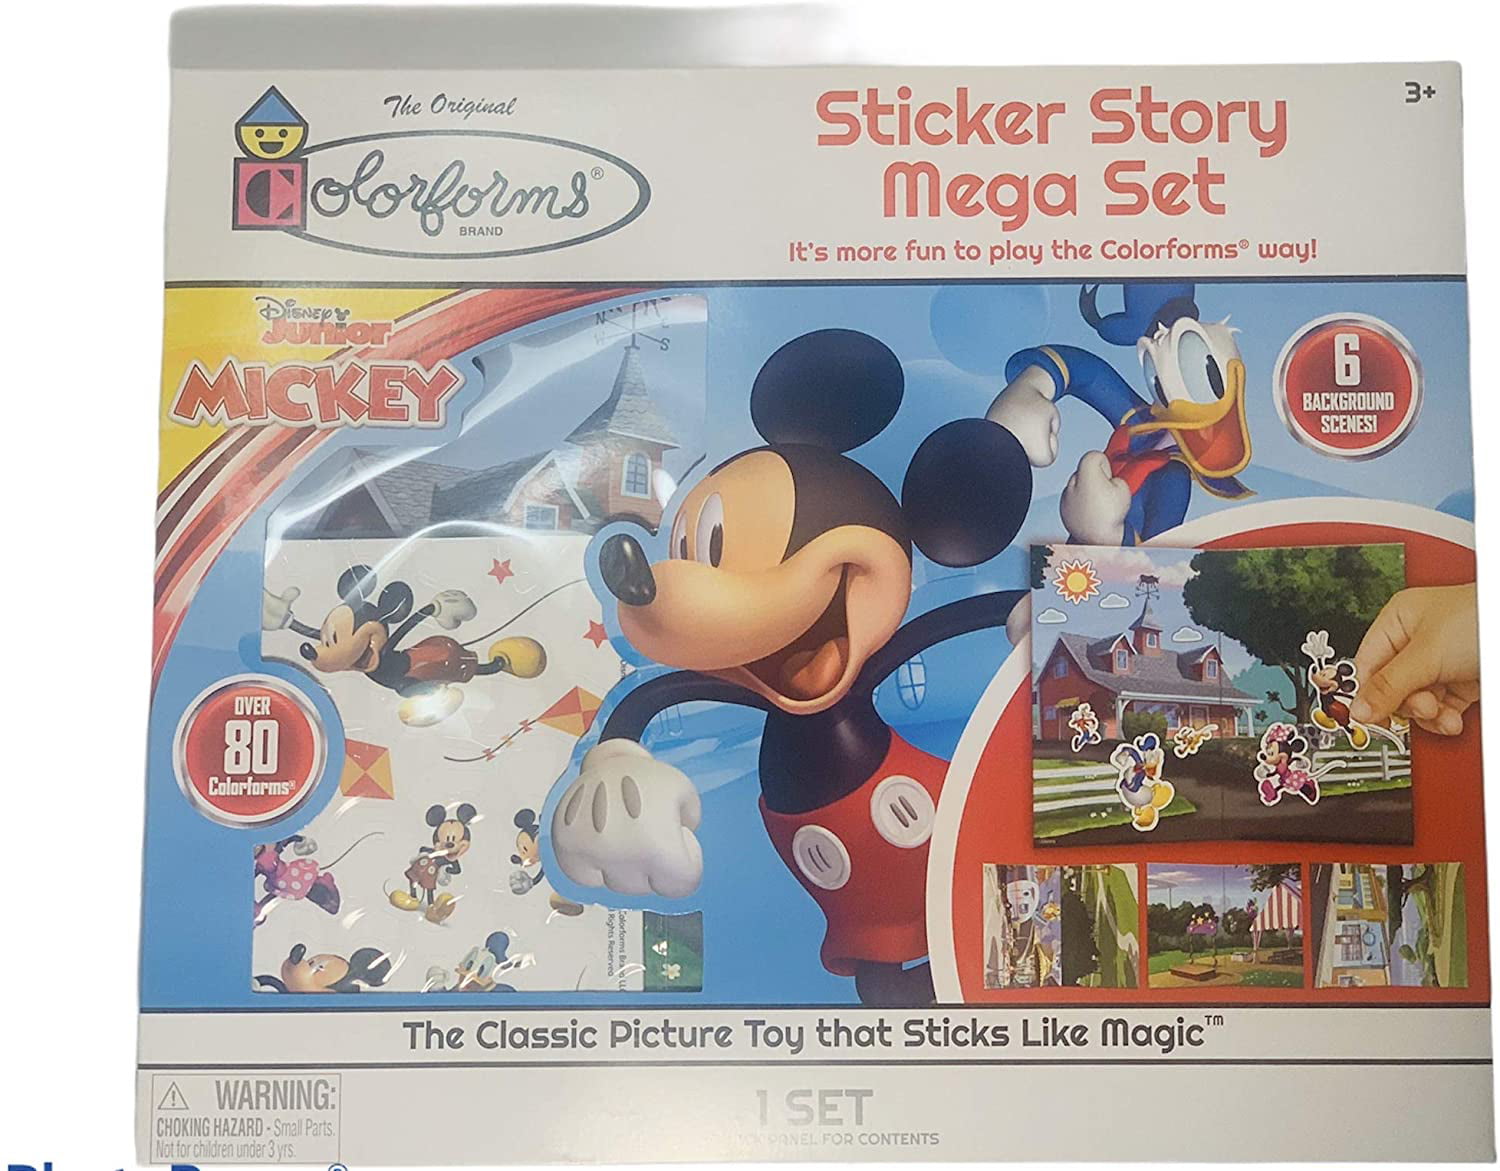 The Classic Picture Toy That Sticks Like Magic 3 Background Scenes and Over 40 Colorforms Mickey Mouse Colorforms Sticker Story Adventure 